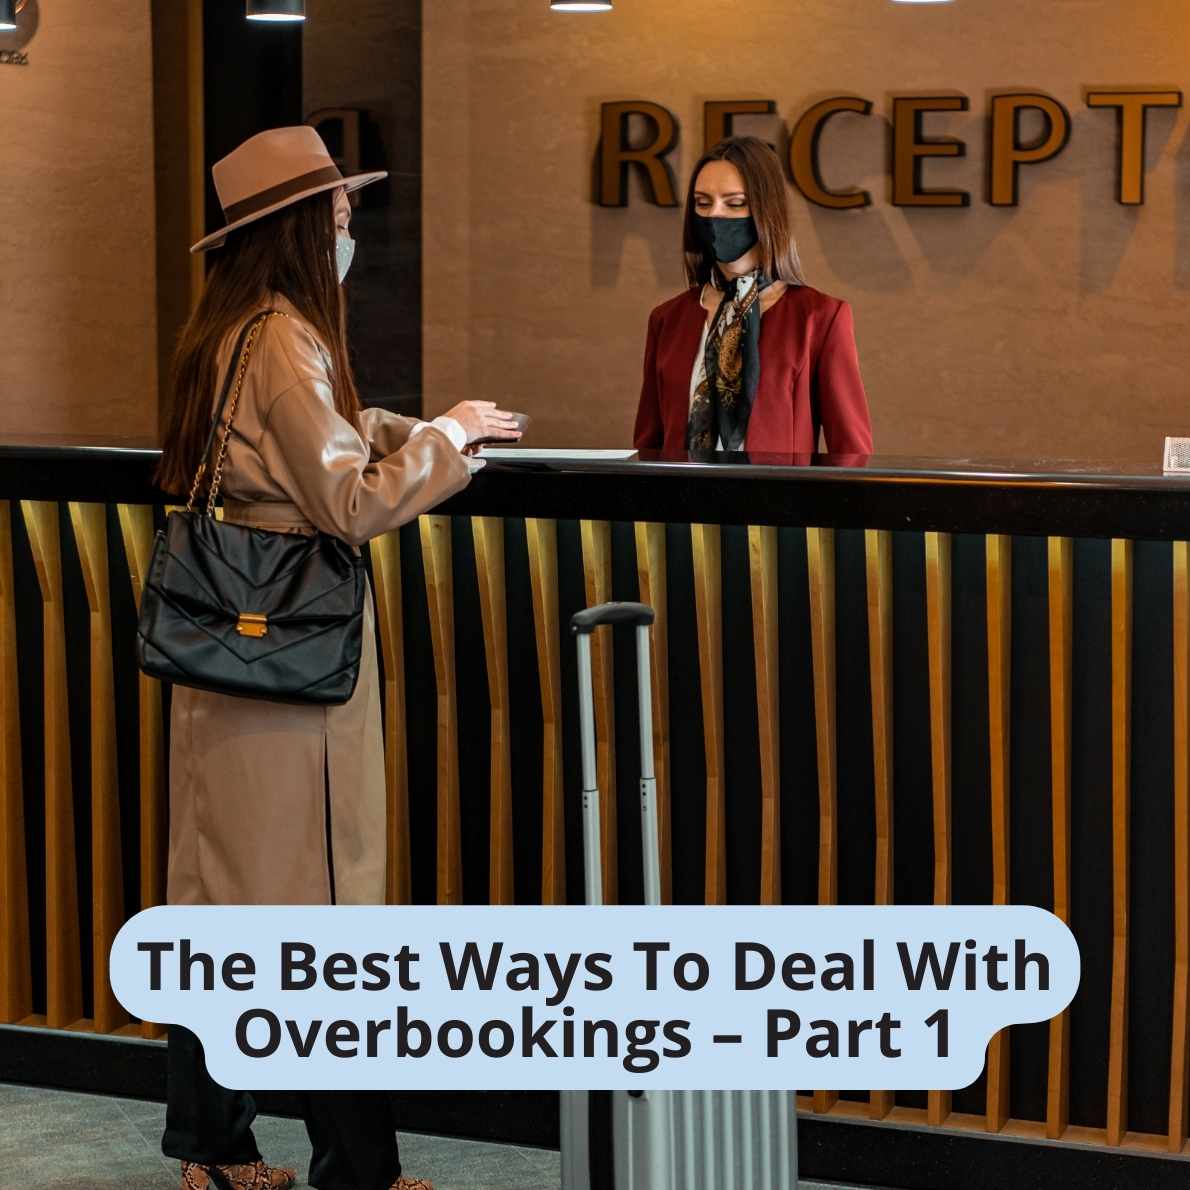 The best way to deal with overbooking